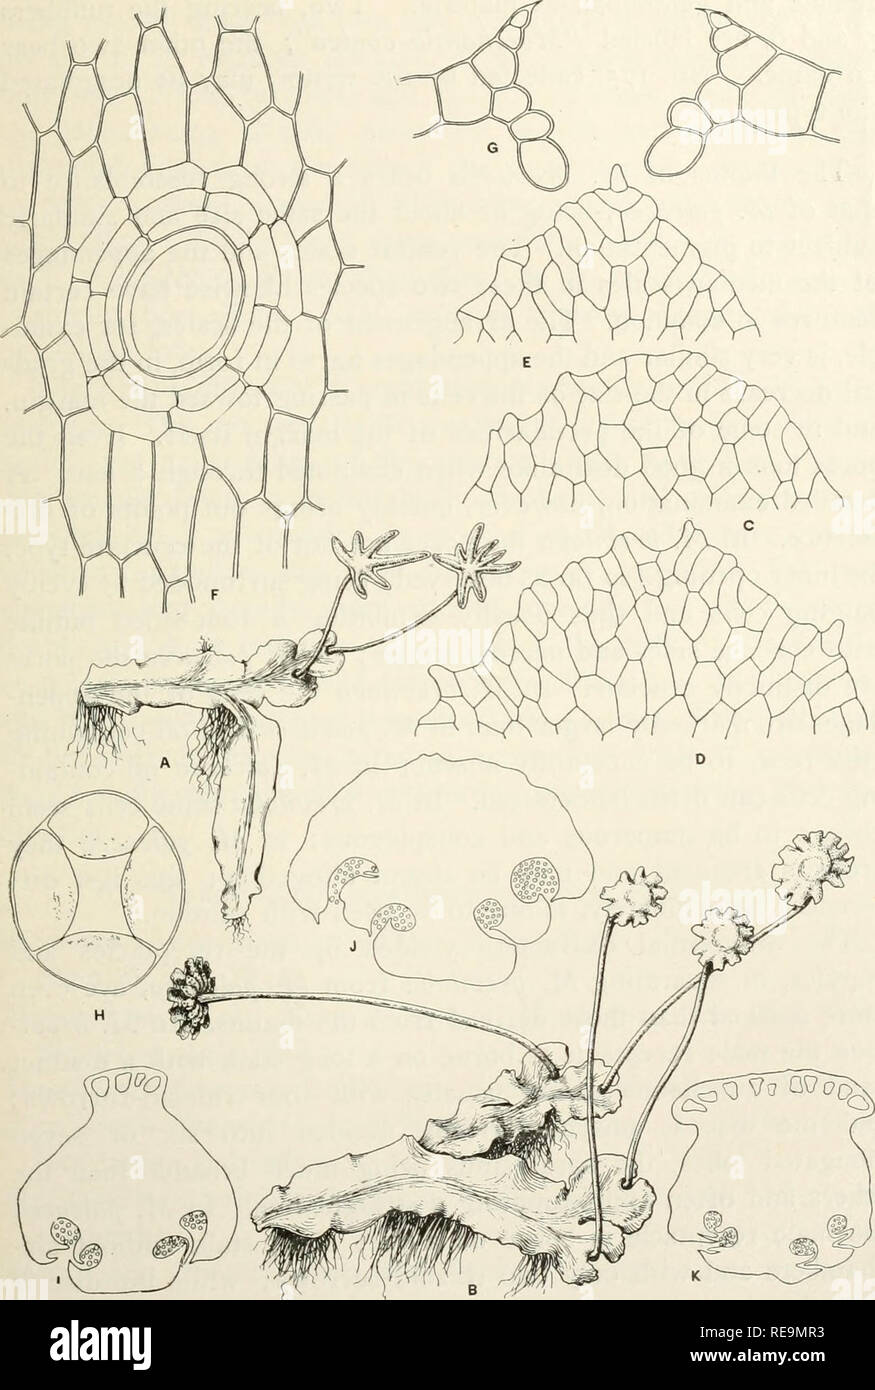 . Contributions from the Osborn Botanical Laboratory. Plants. American Species of Marchantia. 267. Fig. 9. Marchantia breviloba Evans Plants, natural size, and various anatomical details. A. Male plant, x i. B. Female plant, x i. C-E. Appendages of ventral scales, apical por- tions X 100. F. Epidermal pore of thallus, surface view, x 225. U Pore in cross-section, x 225. H. Inner opening of pore, x 225. 1, J. Stalk of male receptacle, cross-sections, x 40; I was cut near base, j, near apex. K. Stalk of female receptacle, cross-section, cut near base. A. Jamaica, W. R. Maxon 1115. B-D, F-K. Jama Stock Photo